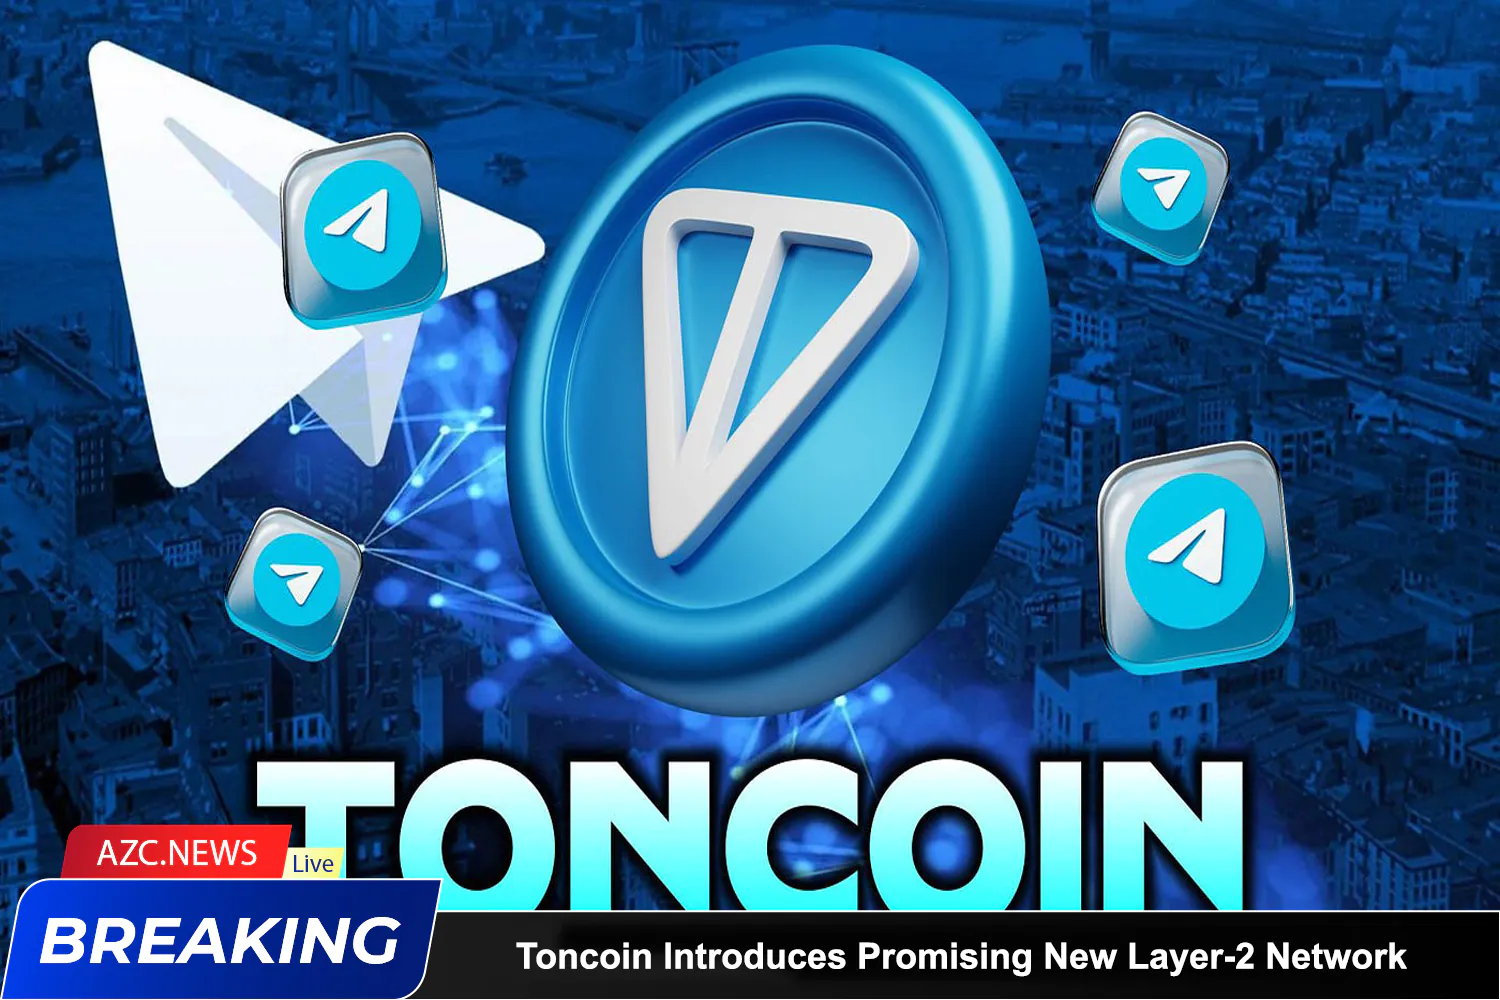 Azcnews Toncoin Introduces Promising New Layer 2 Network